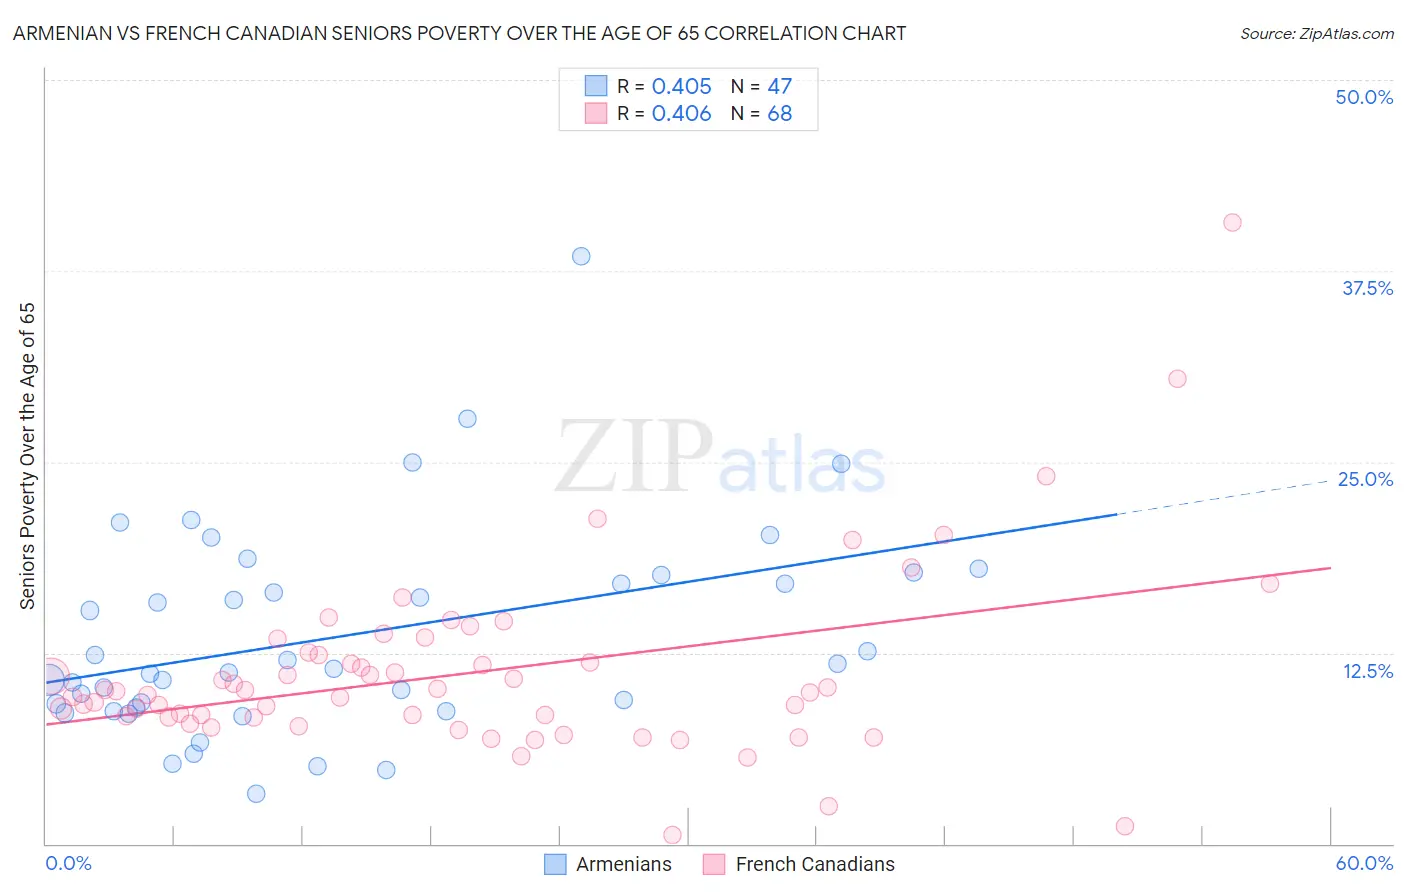 Armenian vs French Canadian Seniors Poverty Over the Age of 65